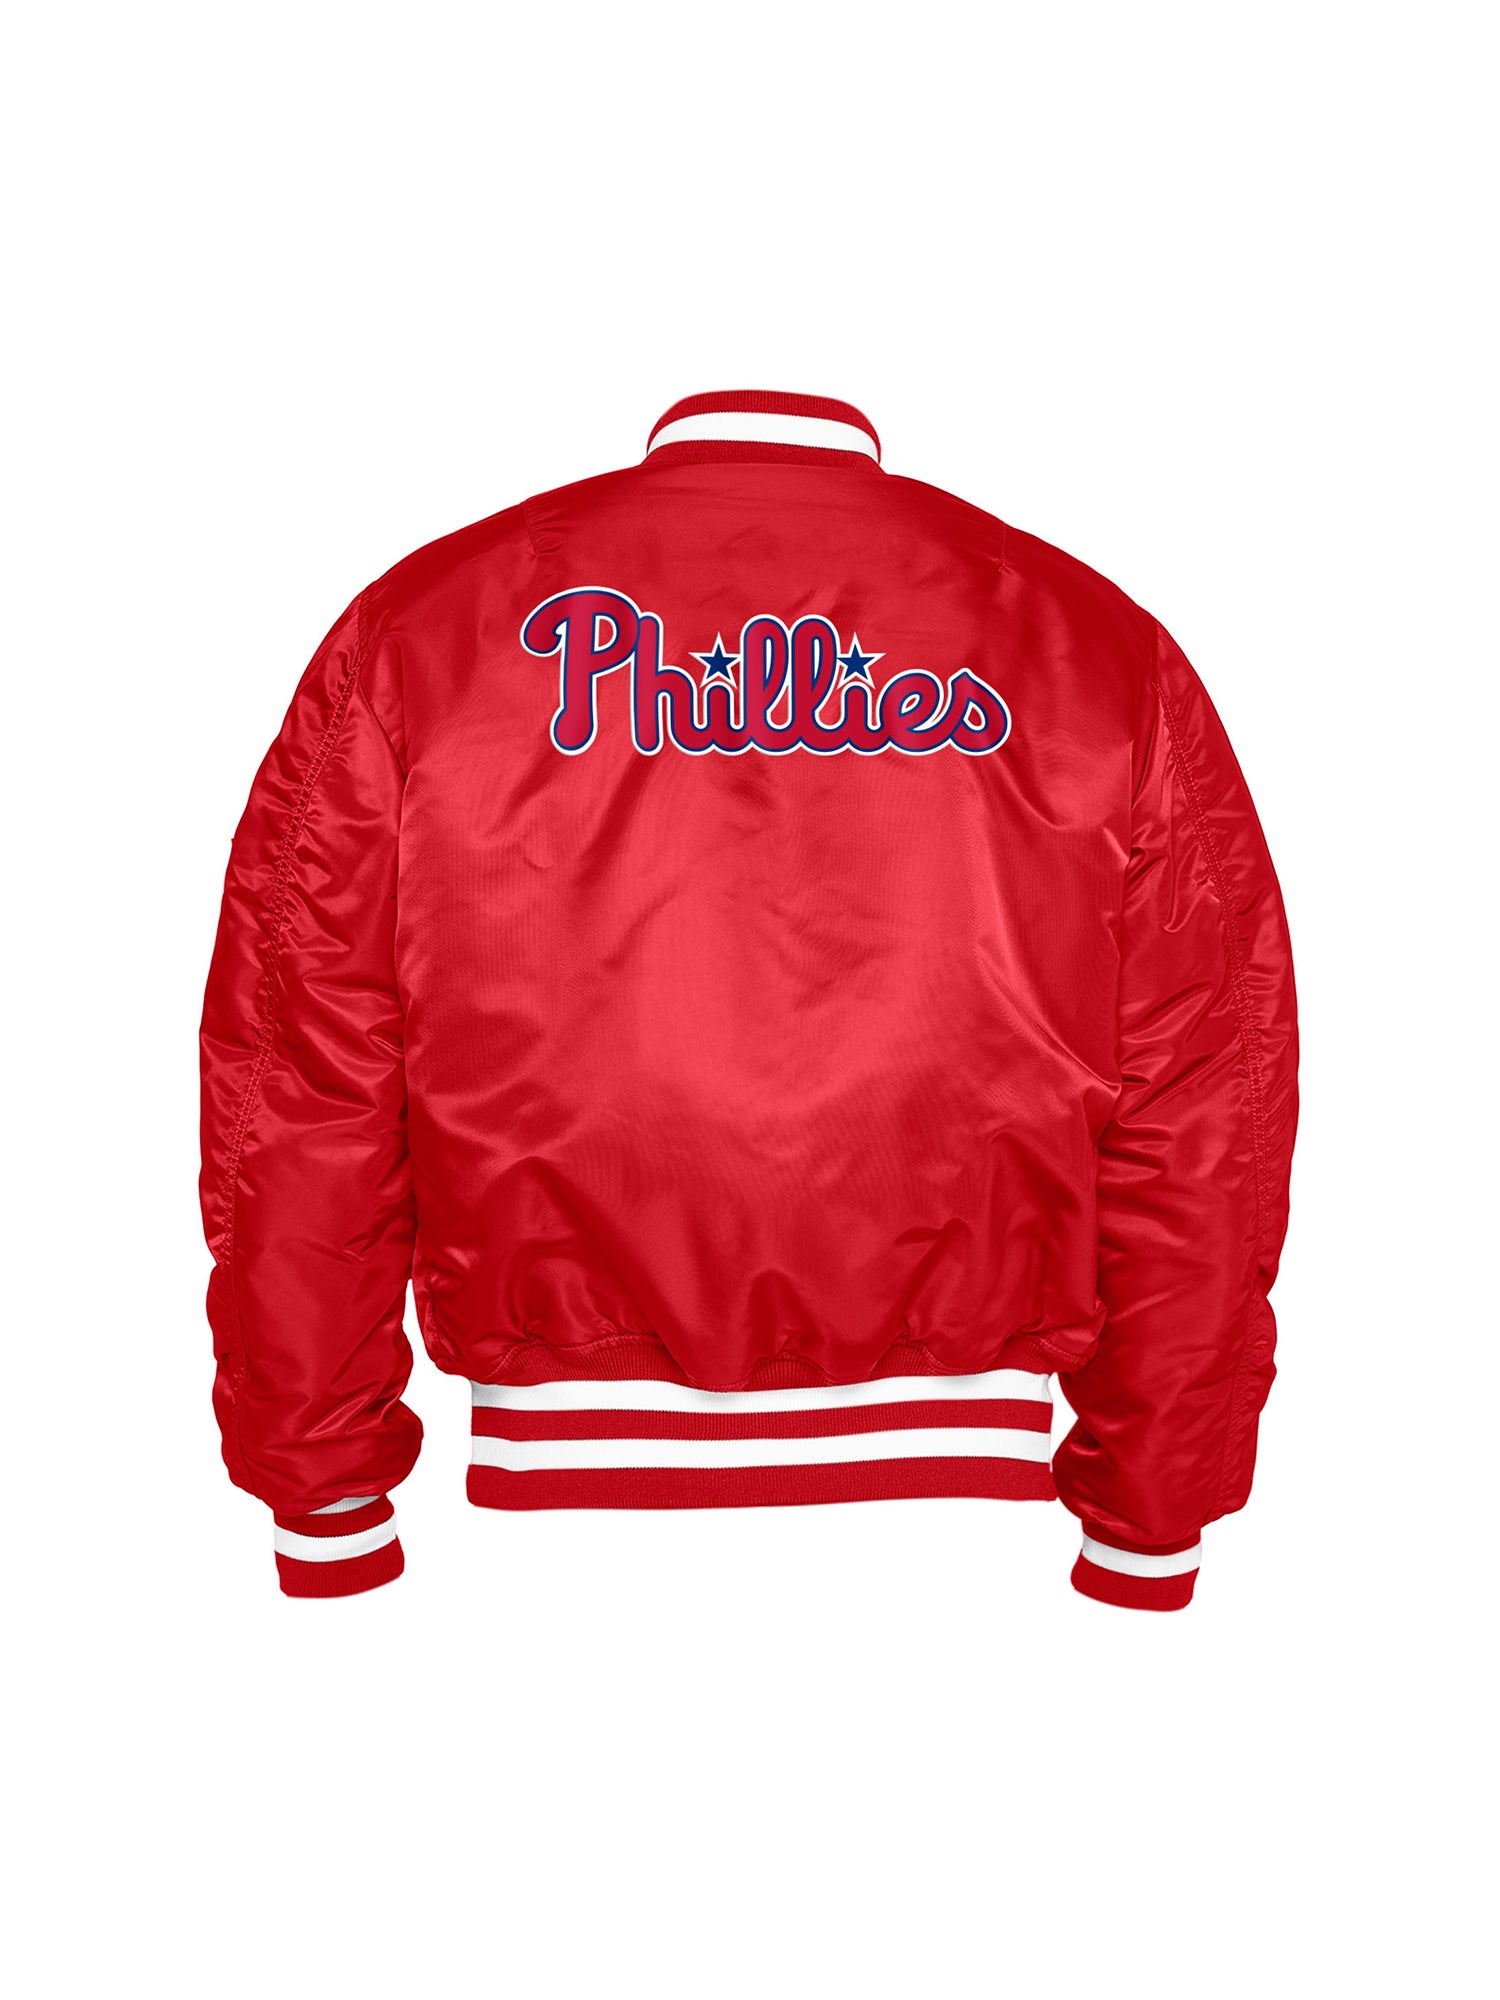 Exclusive Fitted Red Philadelphia Phillies Alpha Industries x New Era Reversible MA-1 Bomber Jacket XL